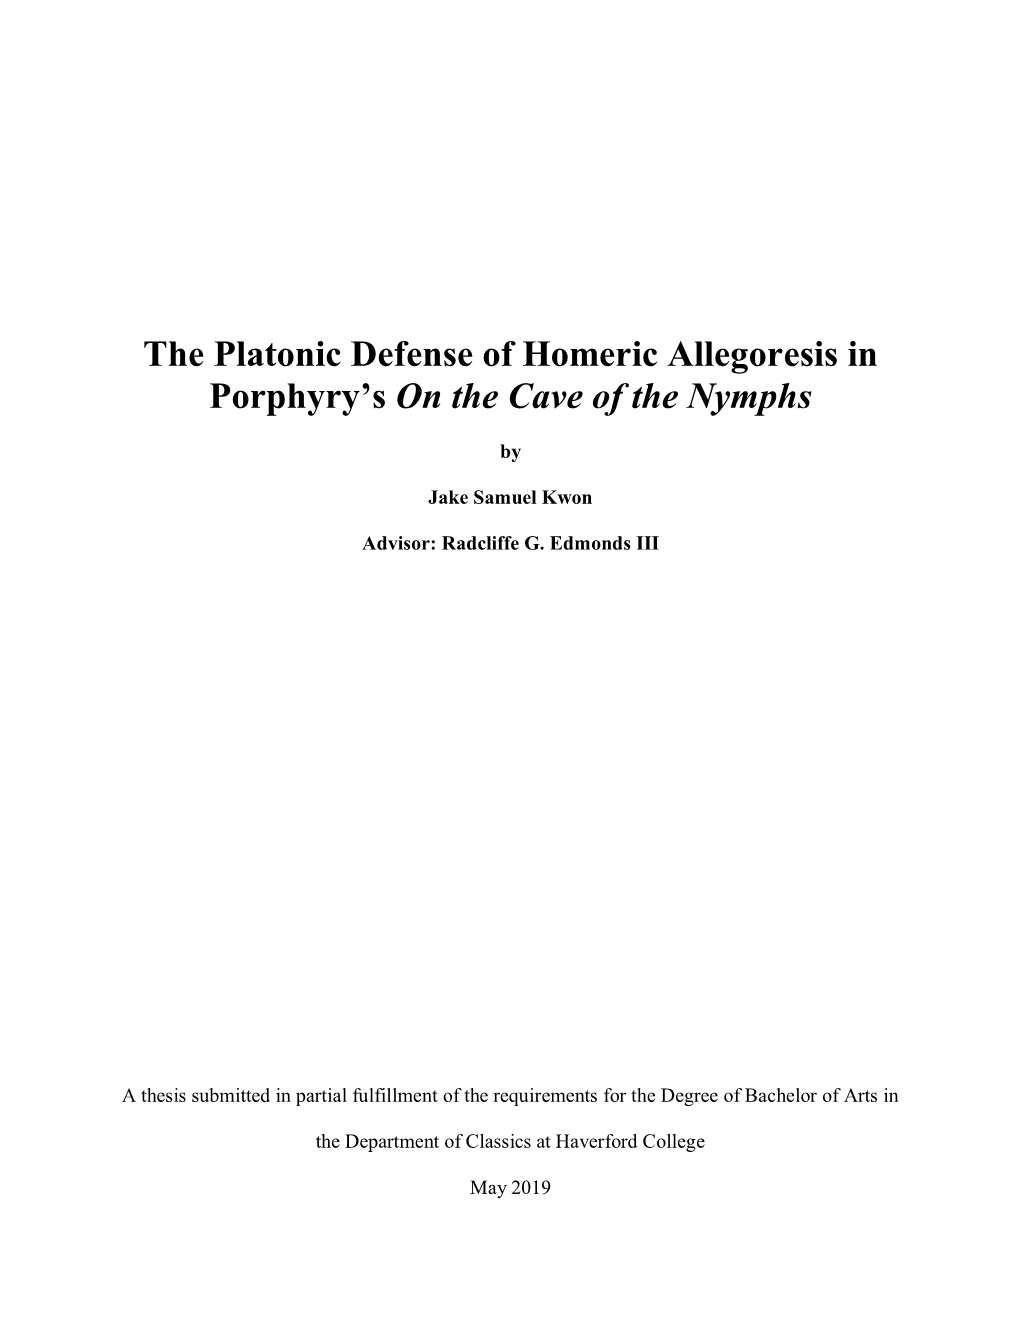 The Platonic Defense of Homeric Allegoresis in Porphyry's on The